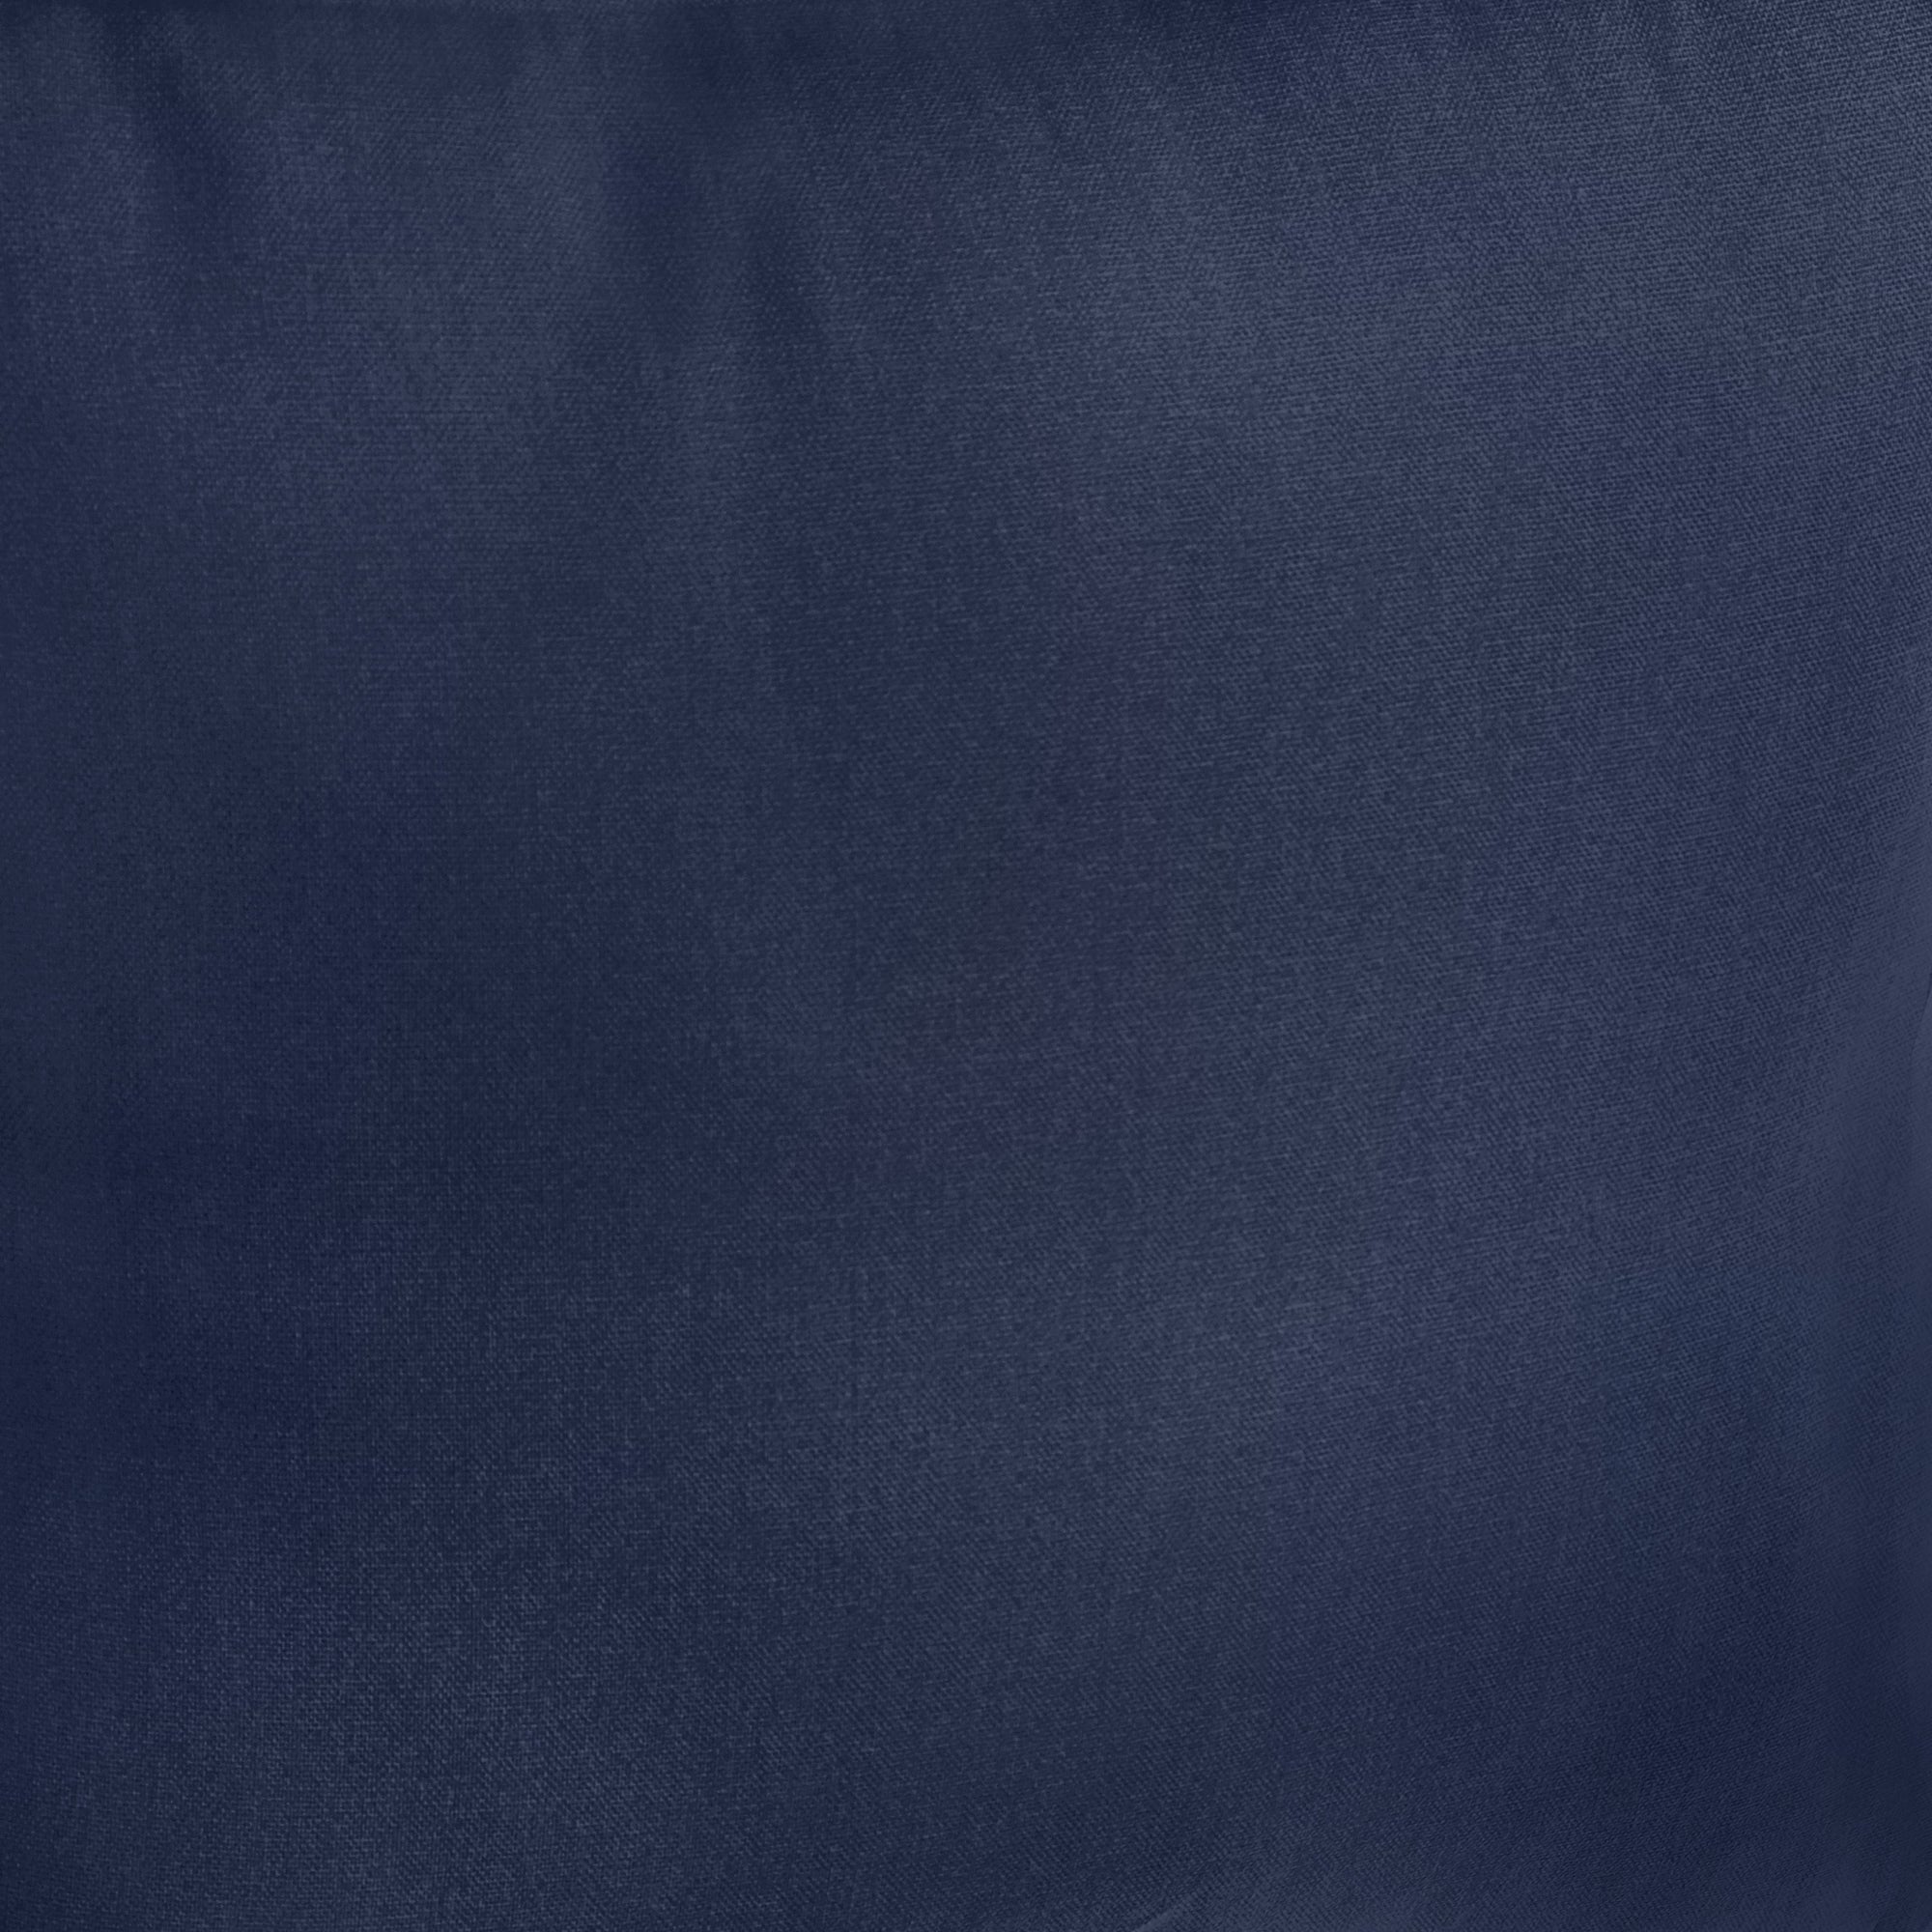 Dijon - Blackout Pair of Pencil Pleat Curtains in Navy - by Fusion